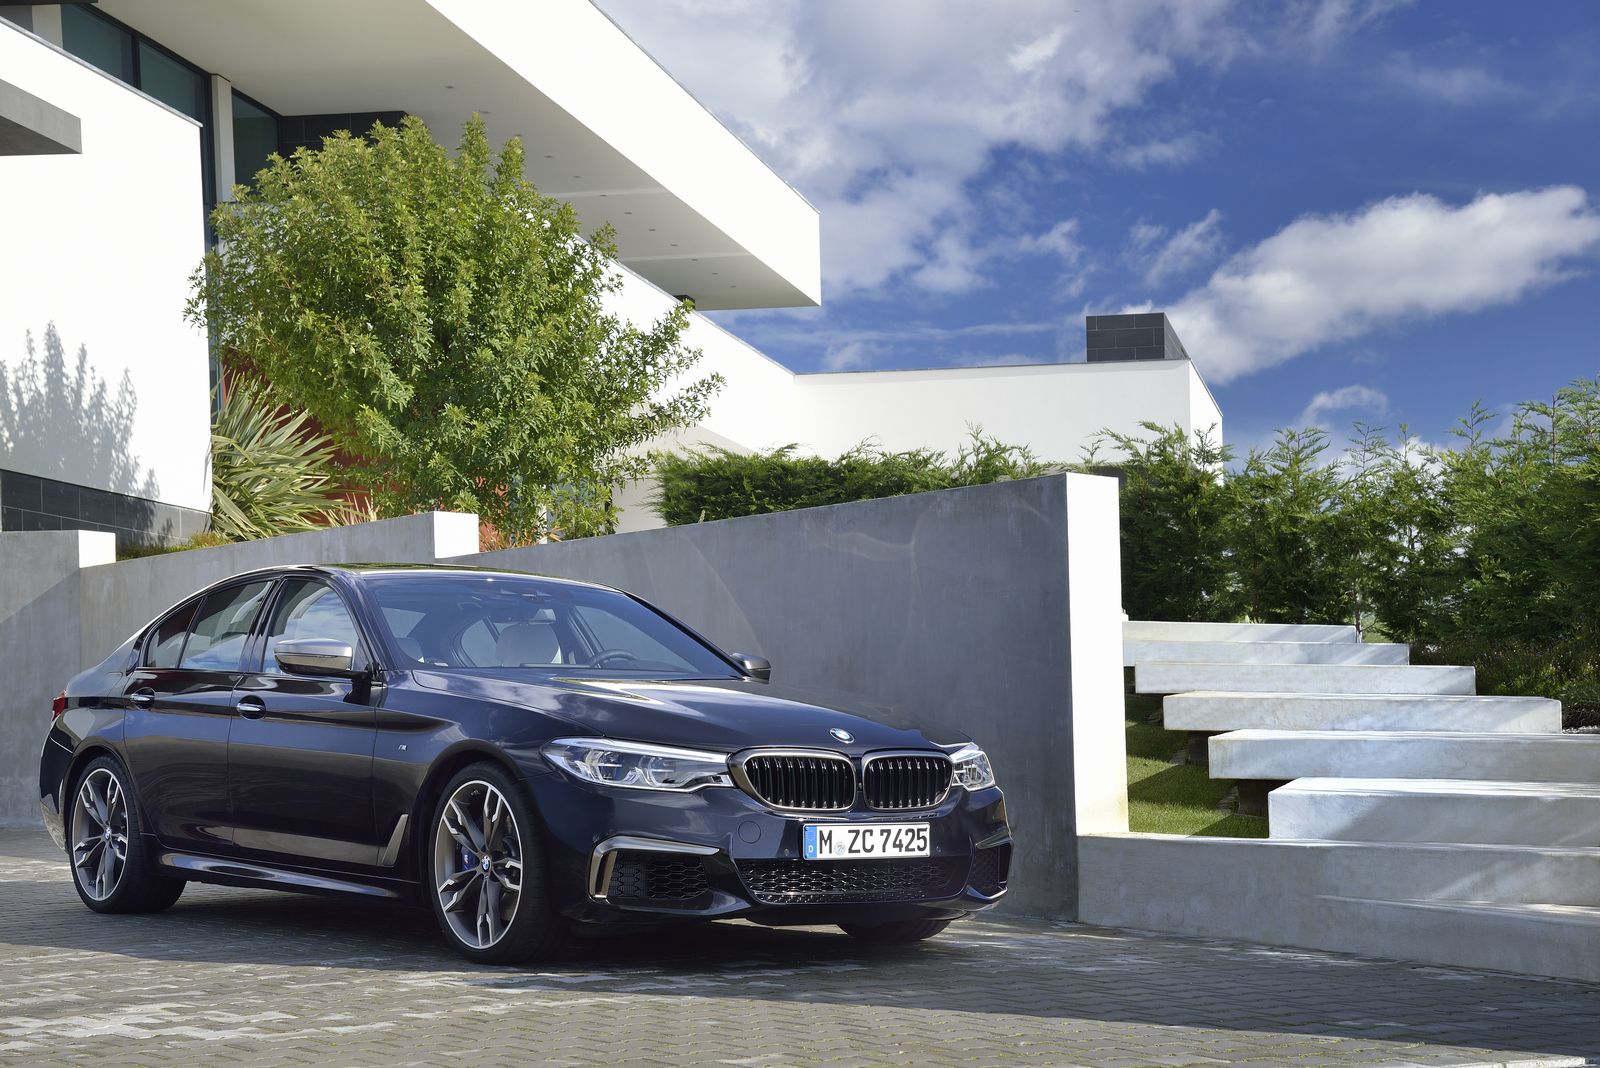 Could The BMW M550i xDrive Be A Smarter Choice Than The M5? | Carscoops1600 x 1068